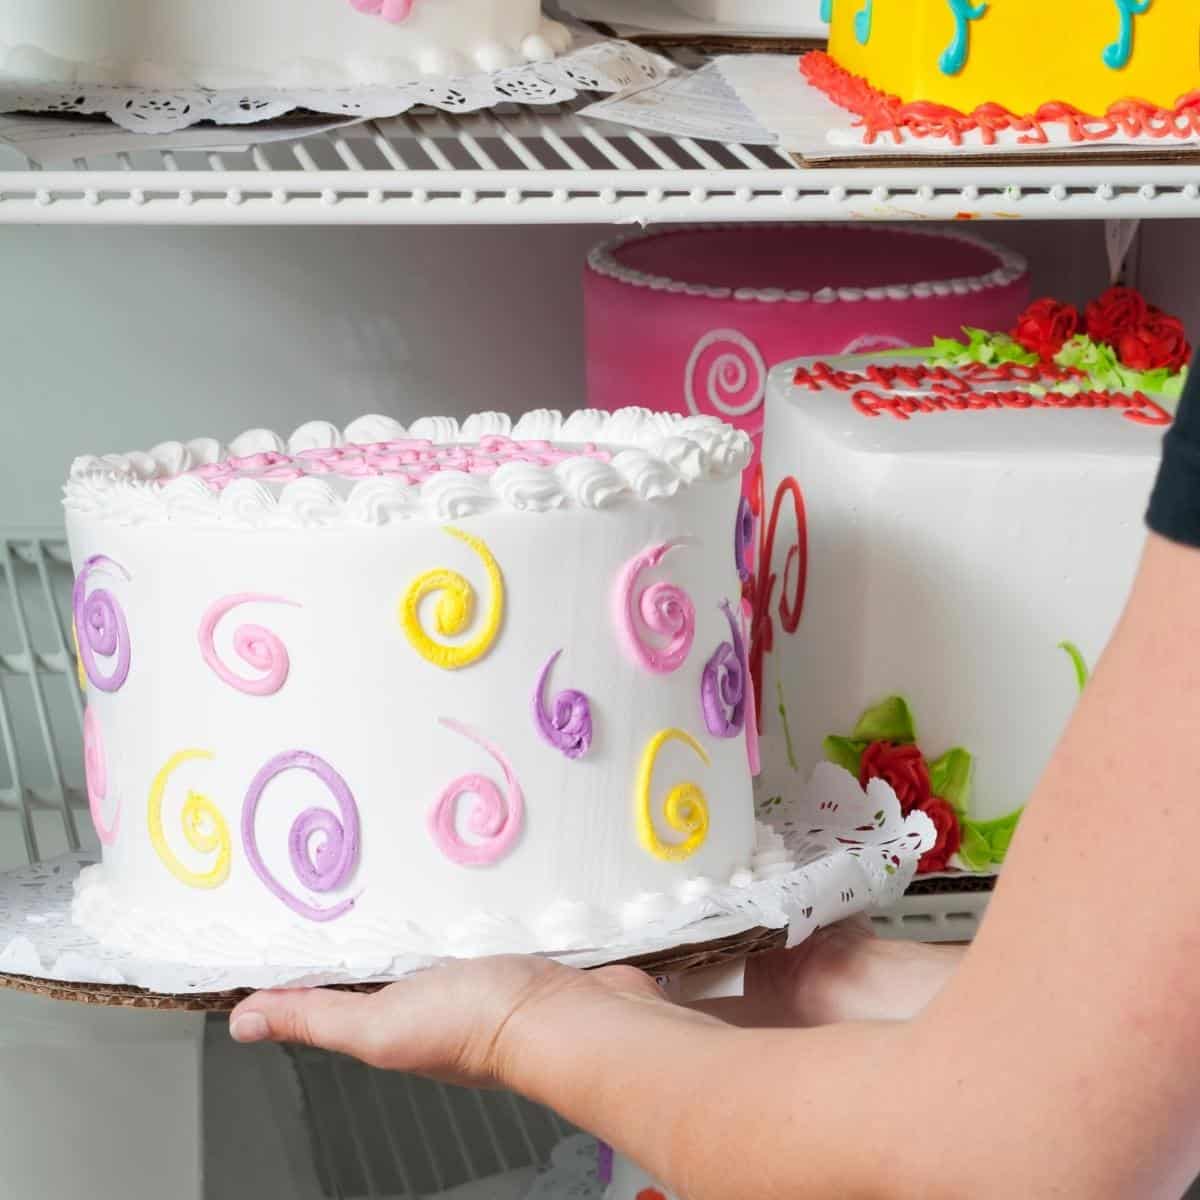 How to Store Baked Cake Layers